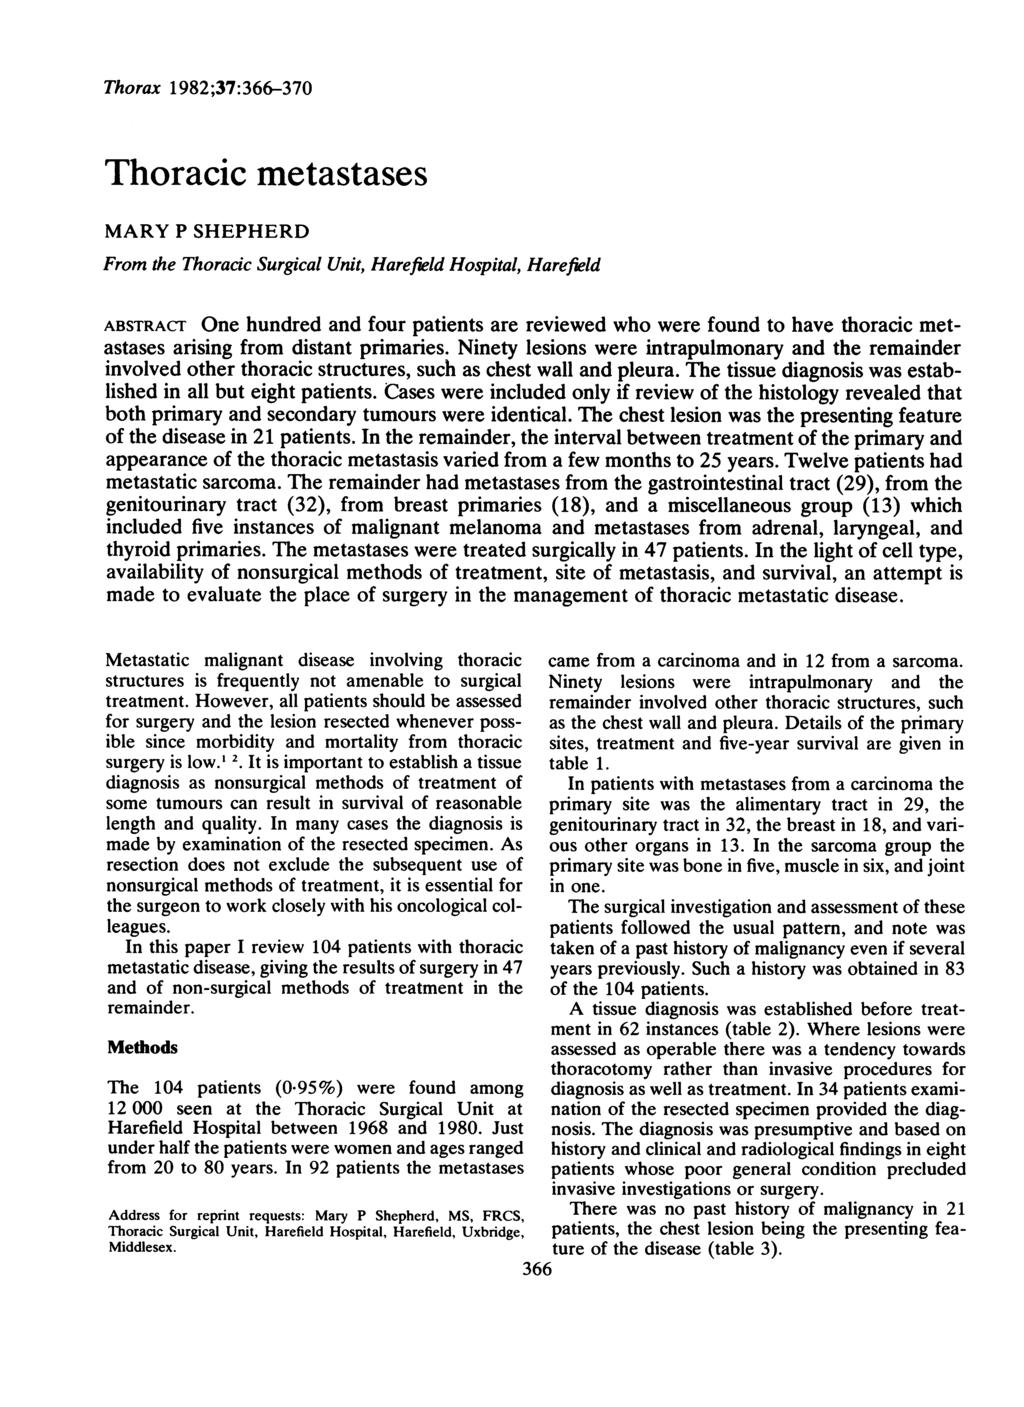 Thorax 1982;37:366-370 Thoracic metastases MARY P SHEPHERD From the Thoracic Surgical Unit, Harefield Hospital, Harefield ABSTRACI One hundred and four patients are reviewed who were found to have